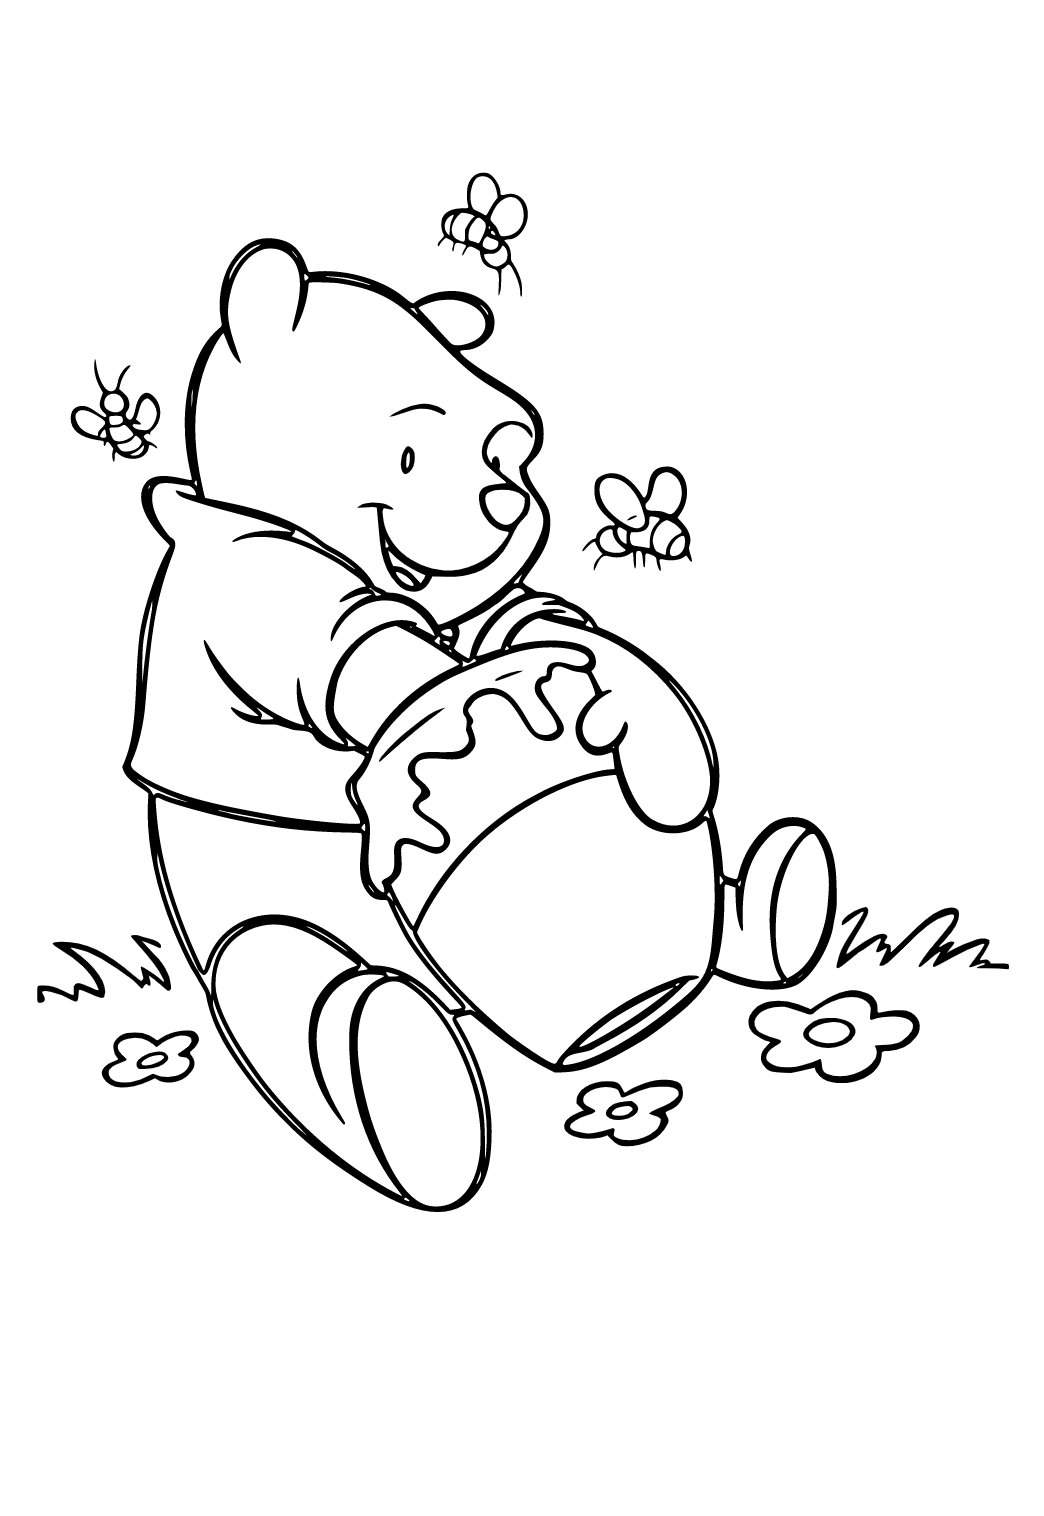 Free printable winnie the pooh honey coloring page for adults and kids